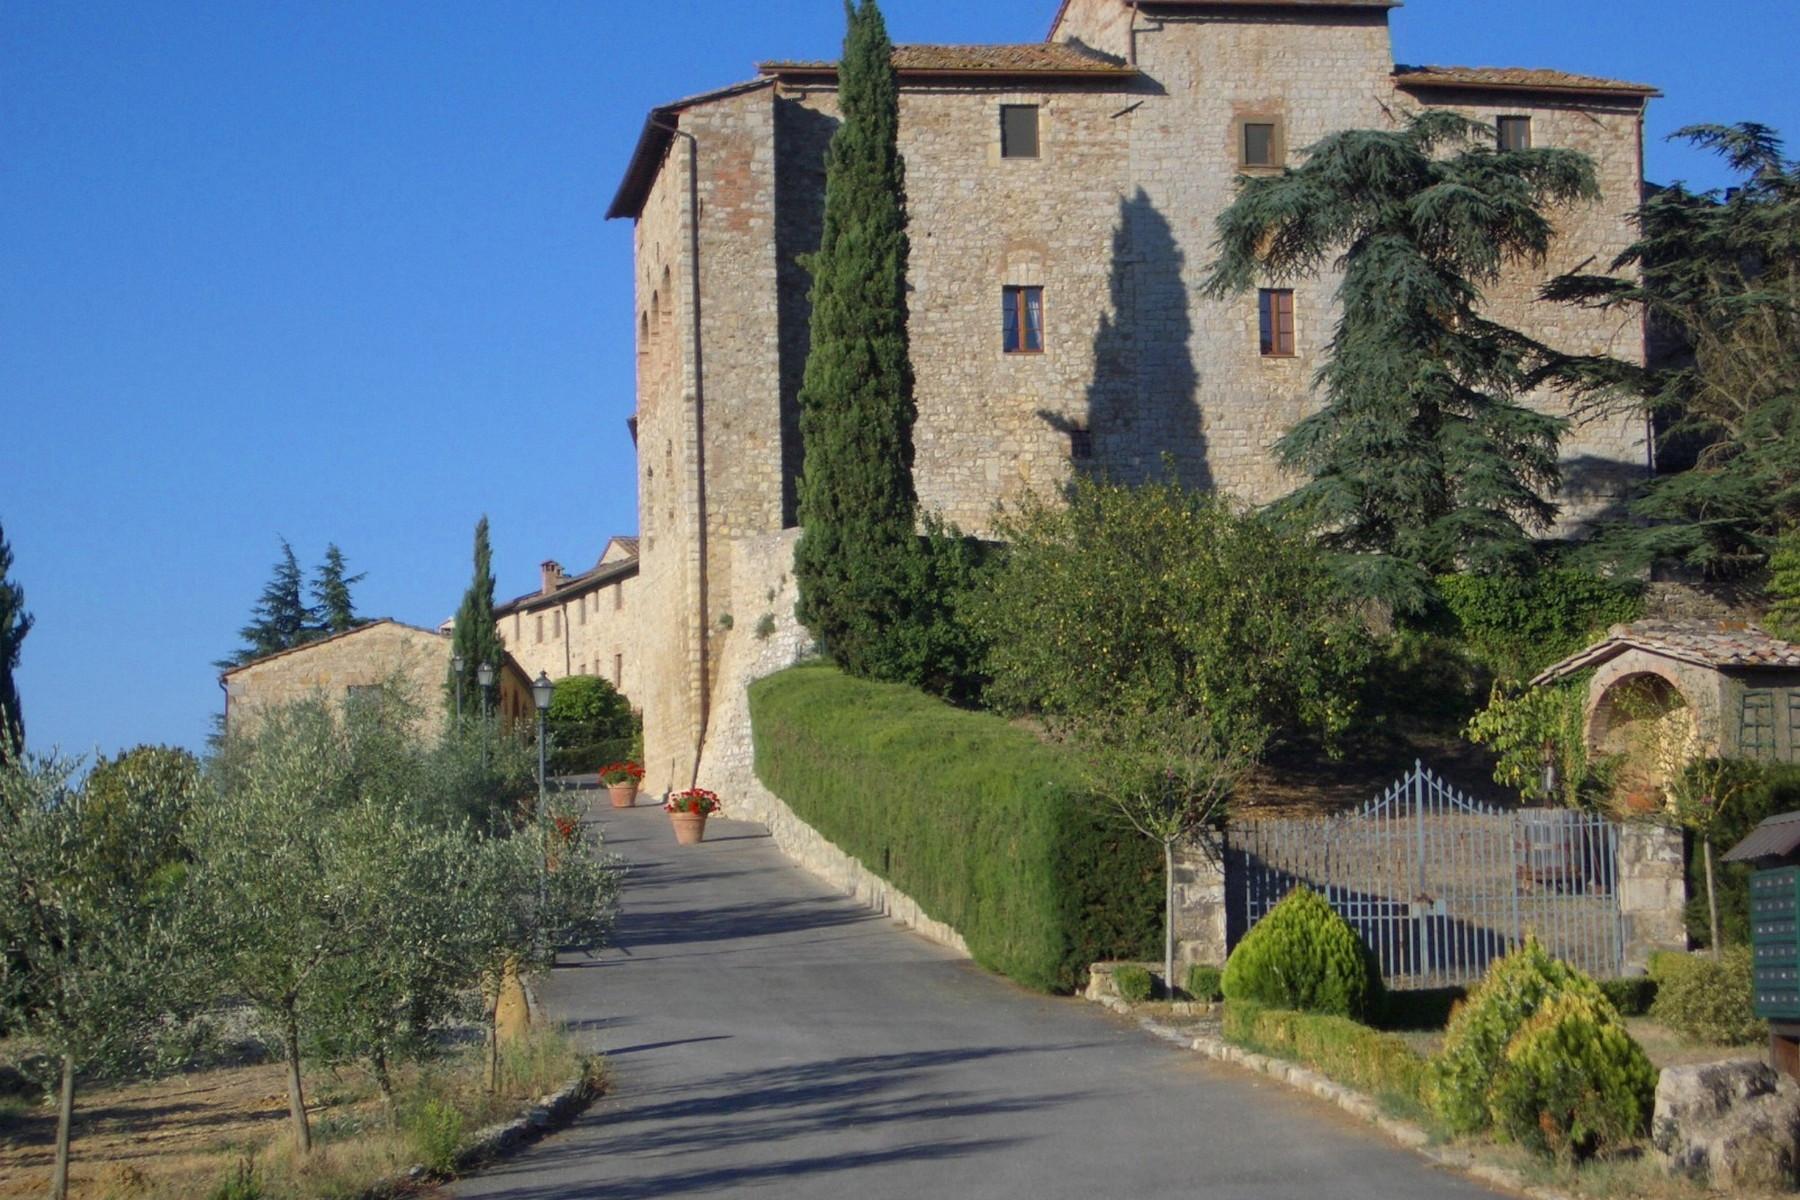 Historic castle with vineyard in 'Chianti' - 2